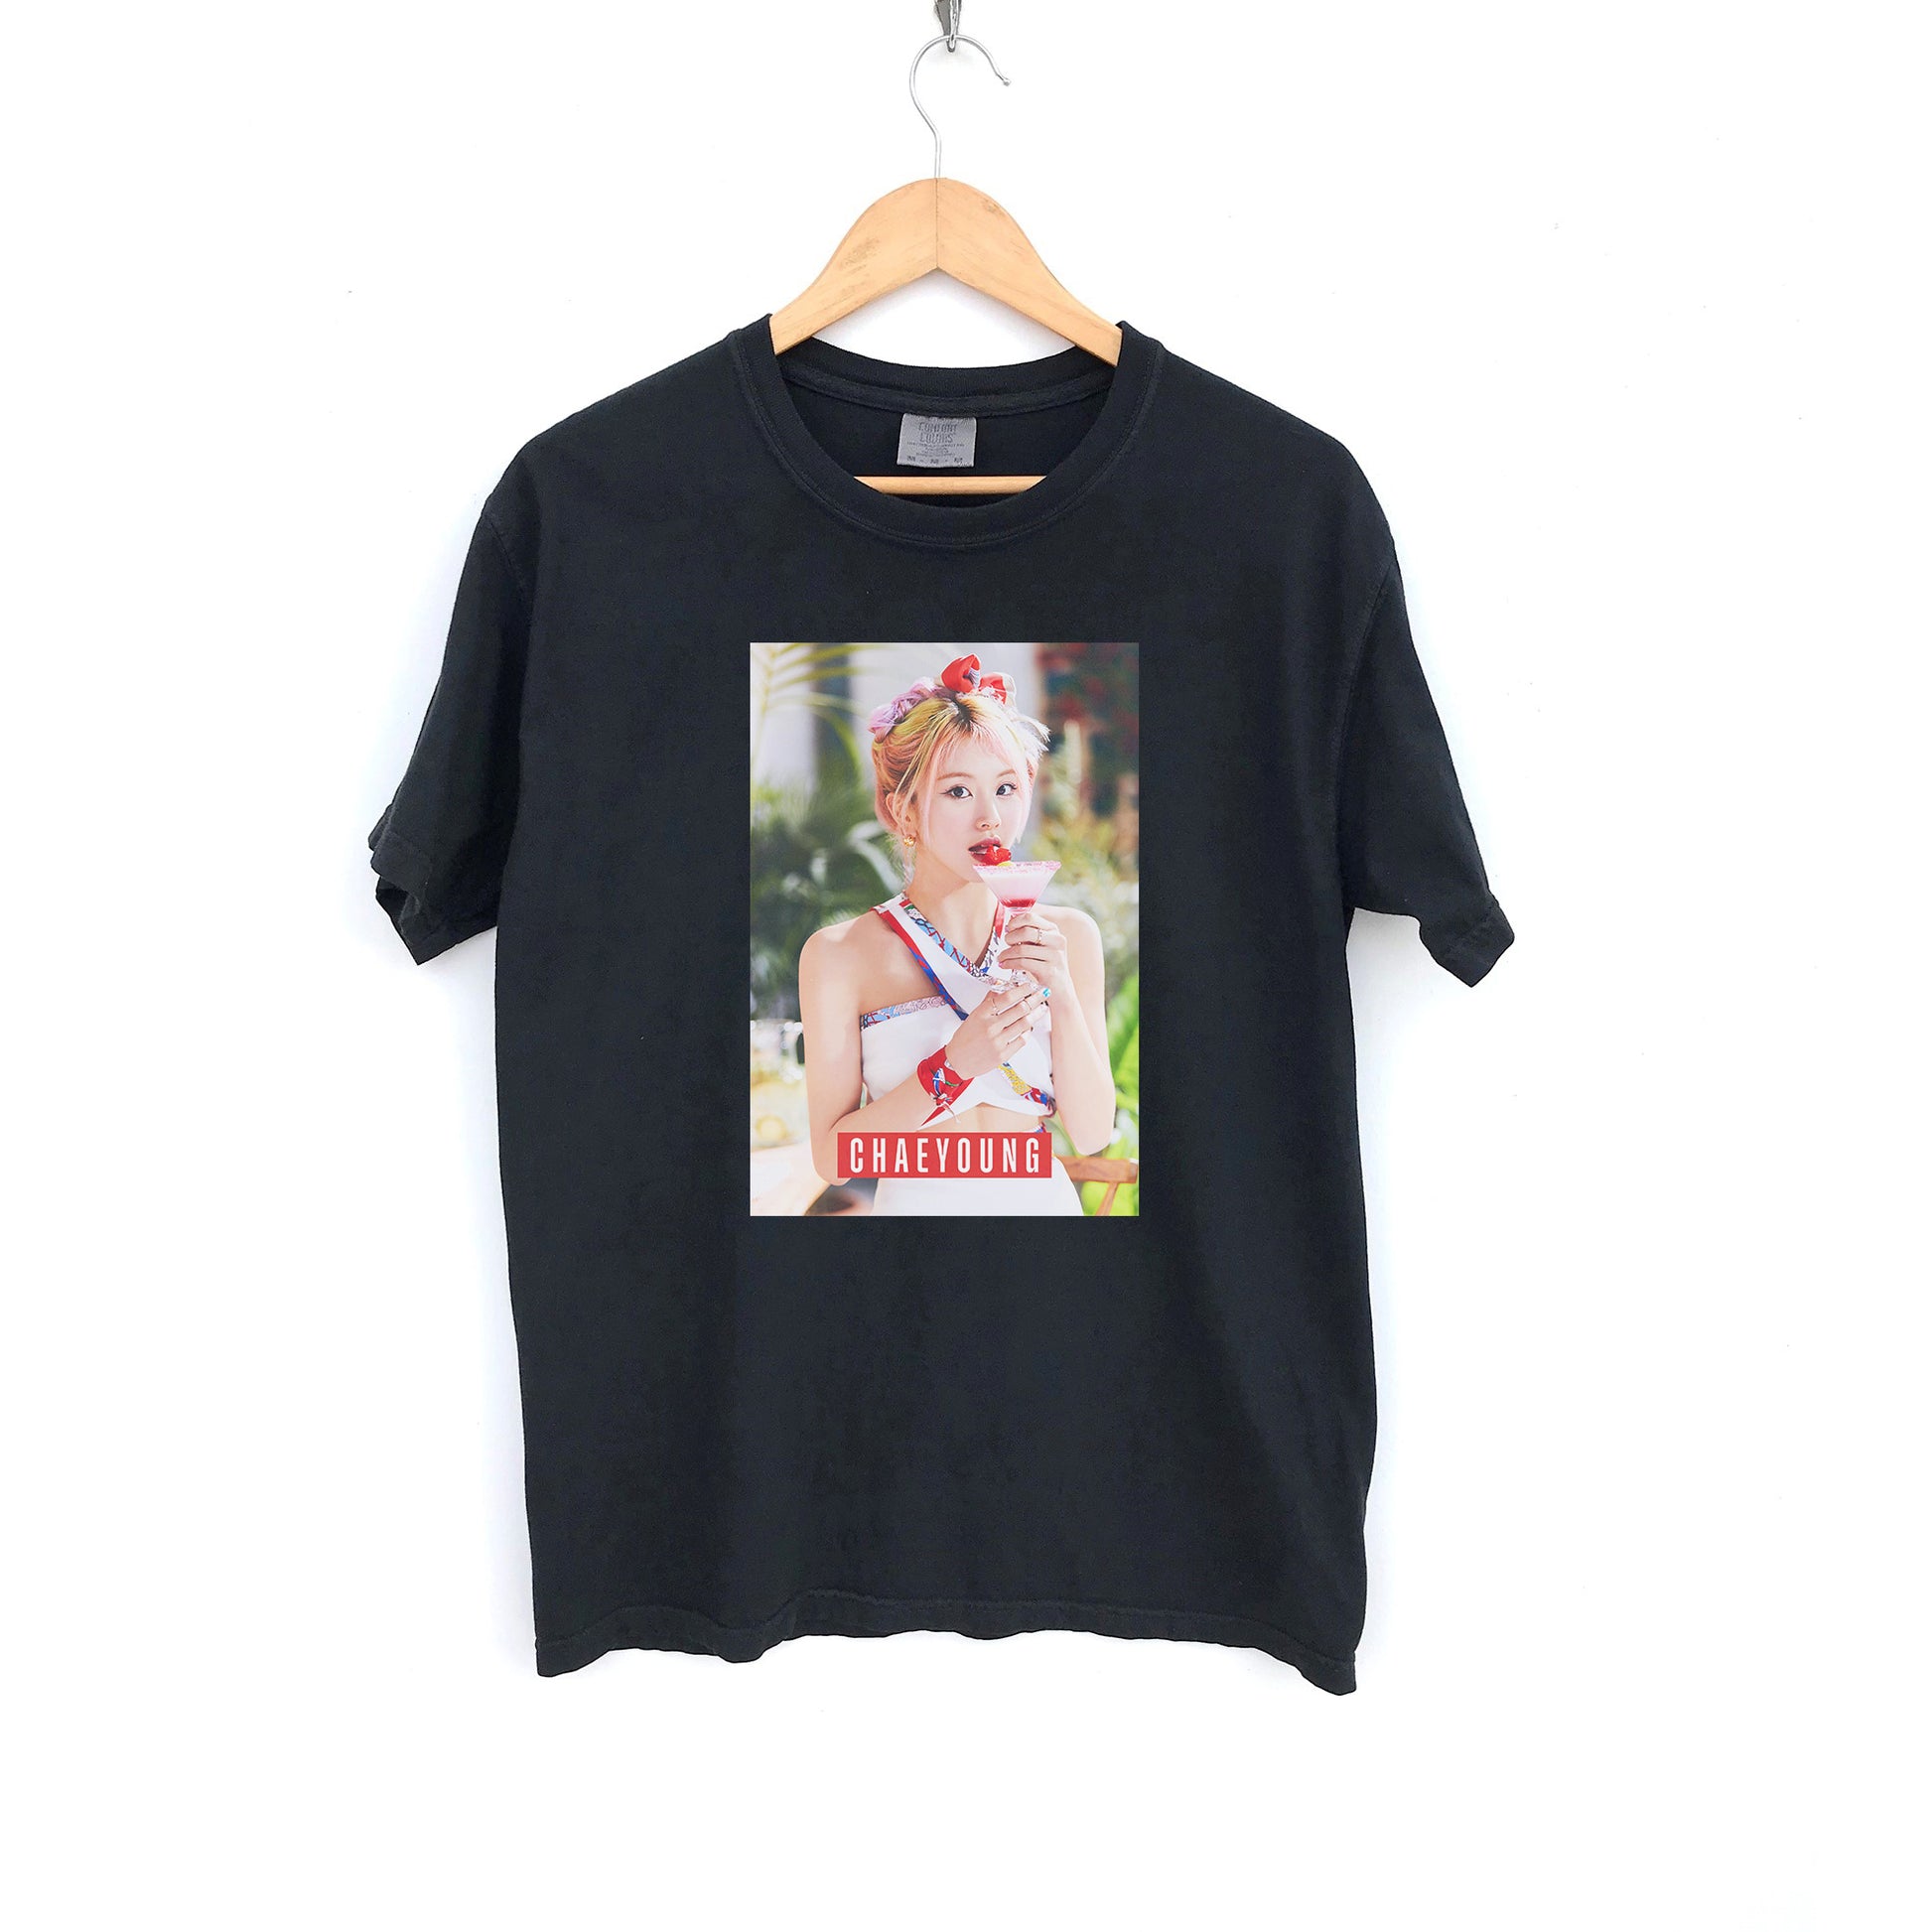 Chaeyoung Comfort Colors Unisex Garment-Dyed T-shirt, Twice Shirt